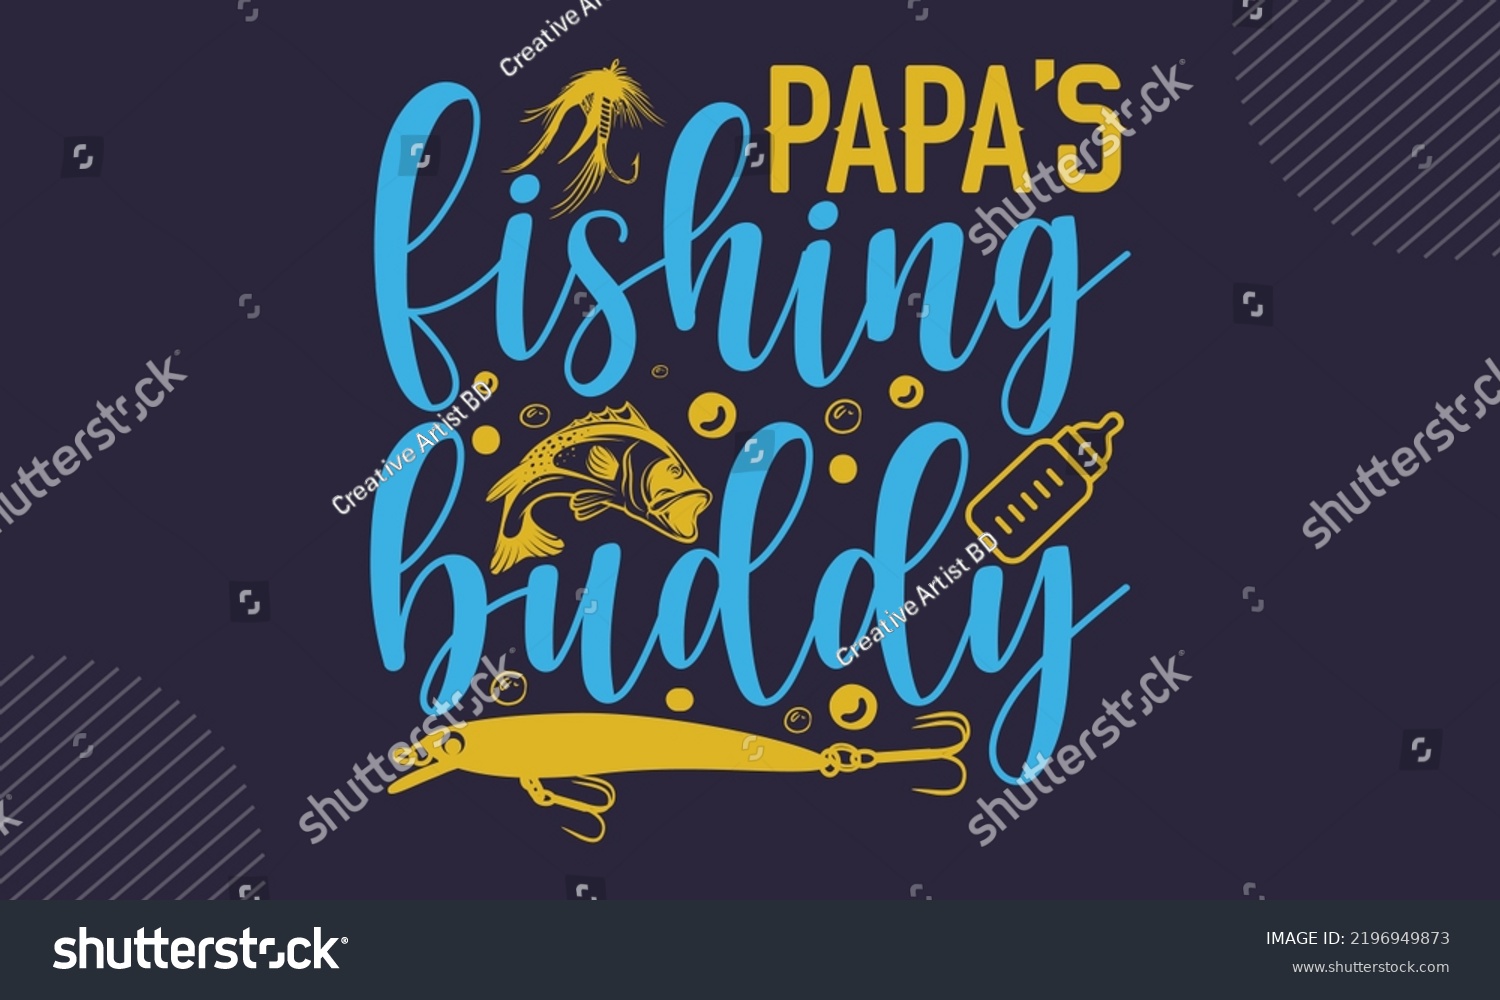 SVG of Papa’s Fishing Buddy - Baby T shirt Design, Baby Shower, Newborn, Baby Quote, Modern quotes calligraphy, Isolated on white background, svg svg